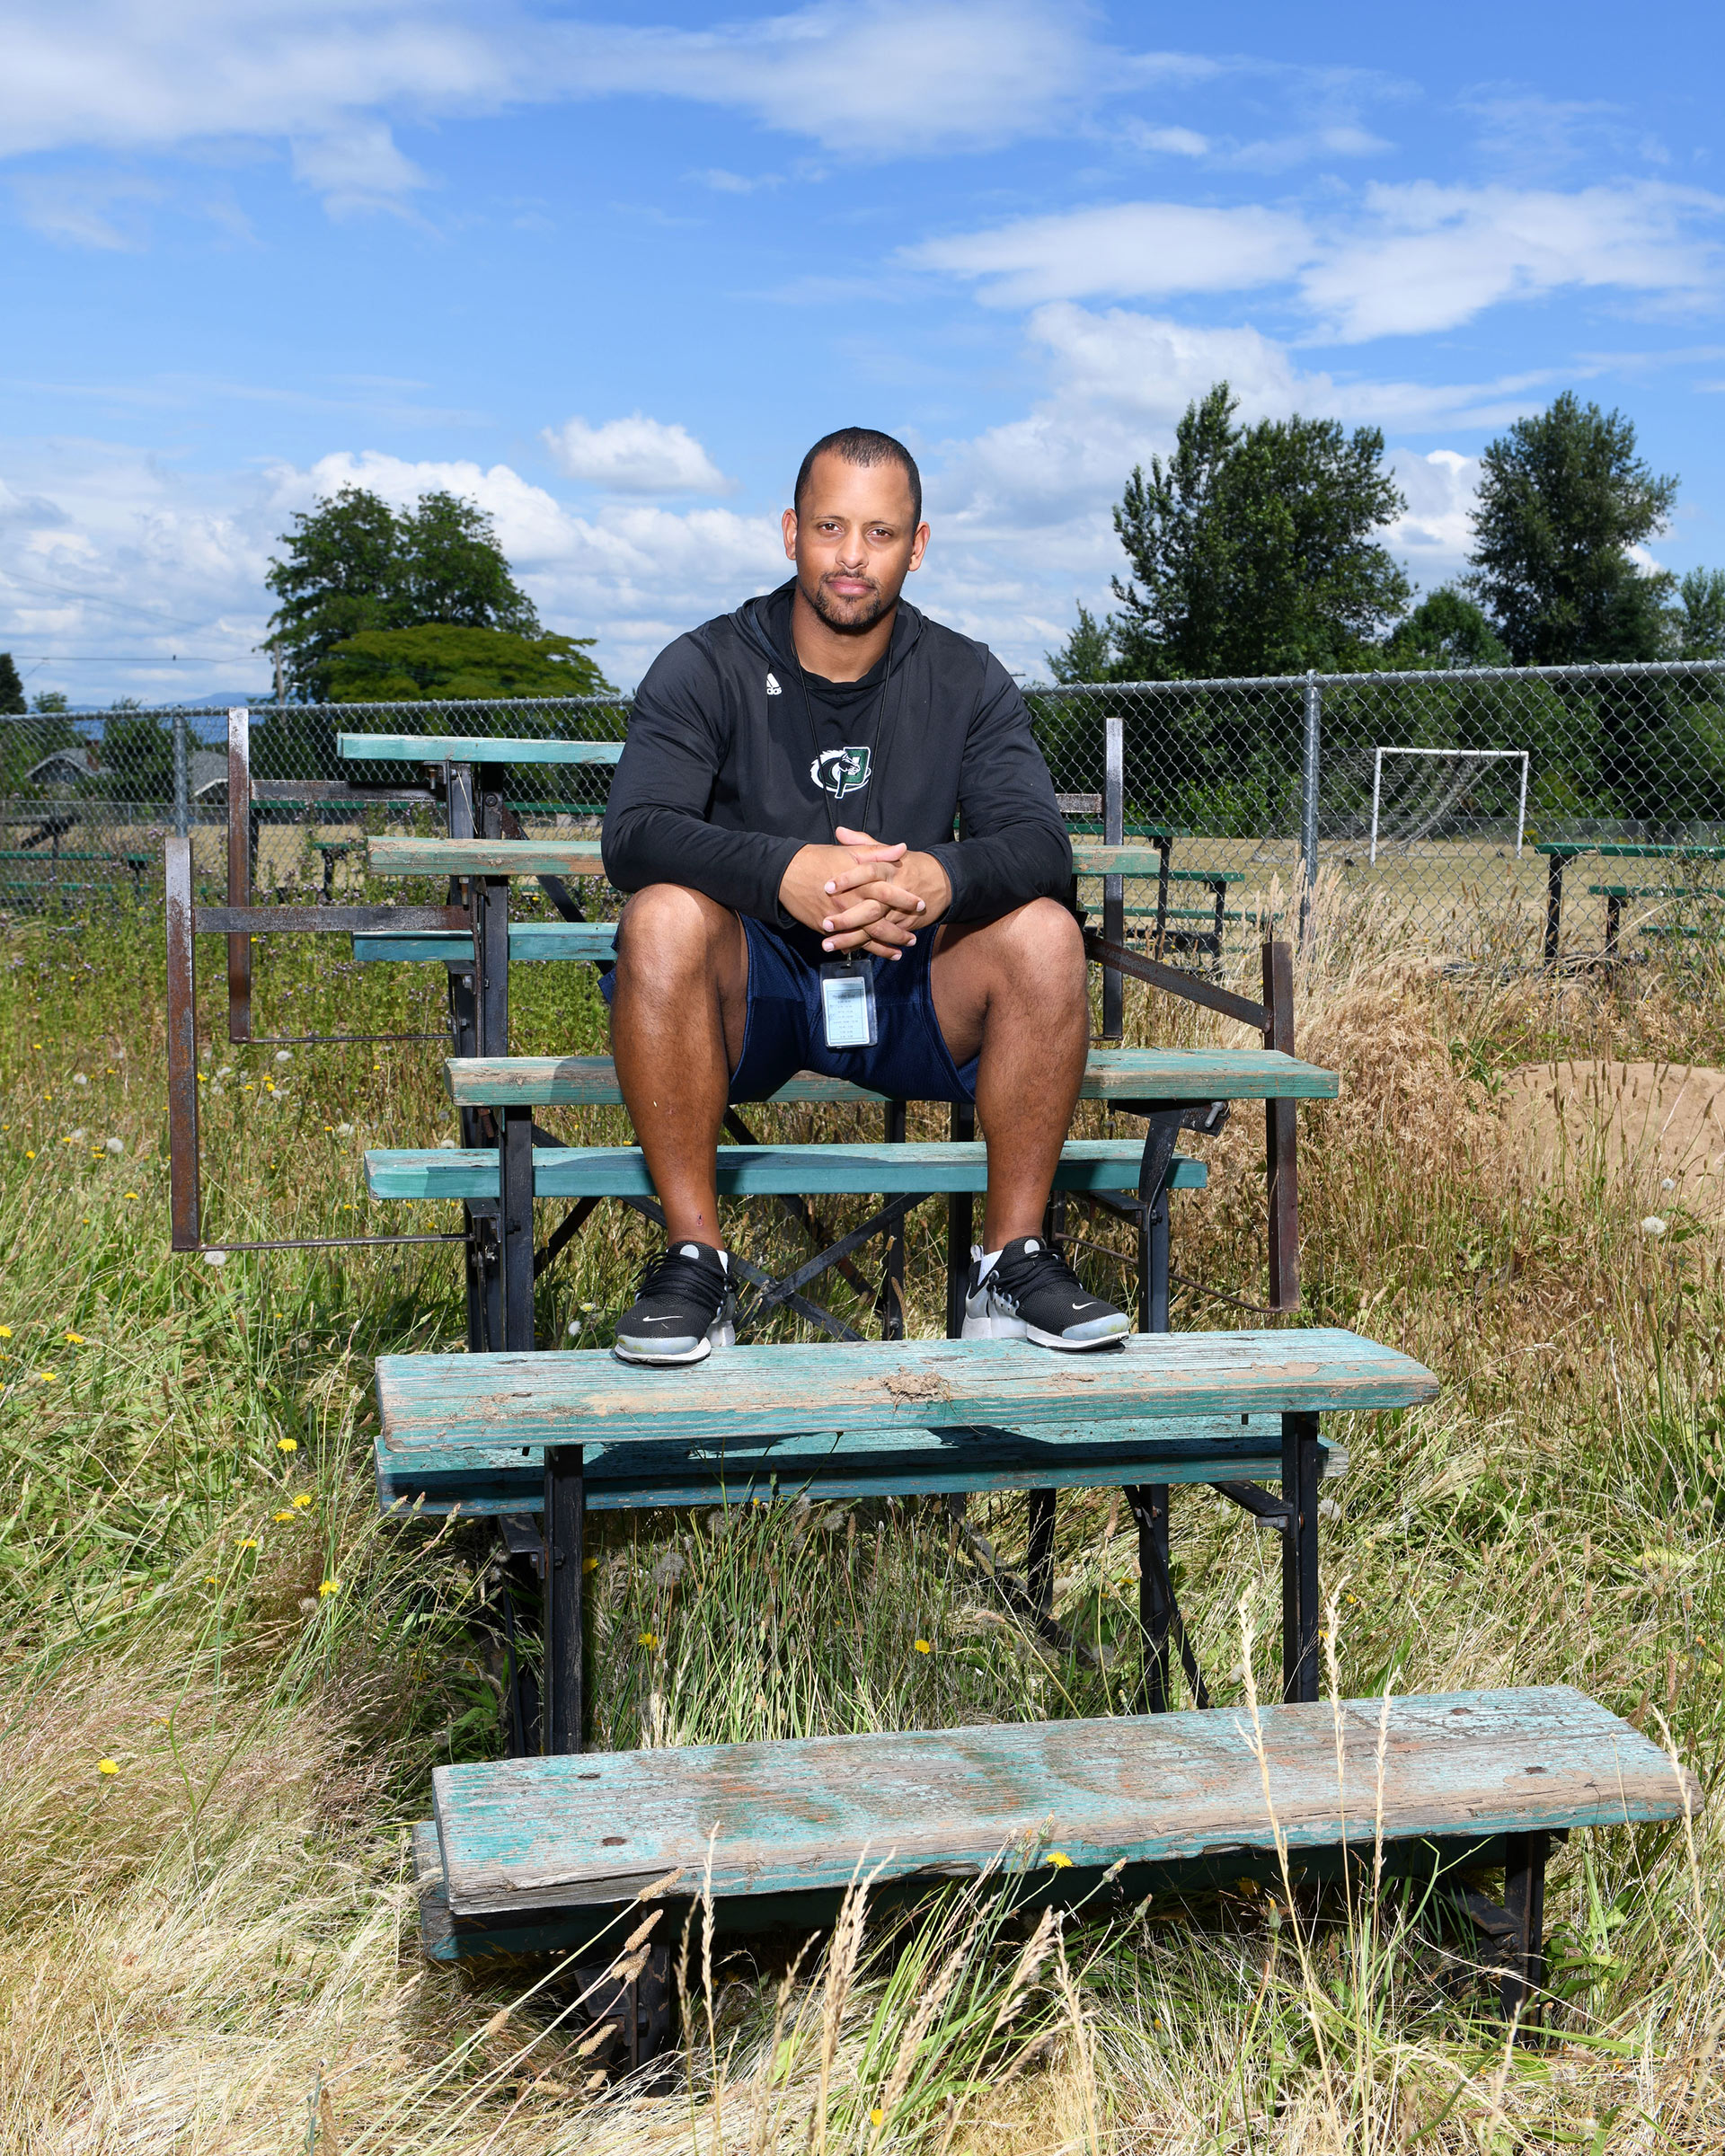 Parkrose High School football and track coach Keanon Lowe in Portland on June 25